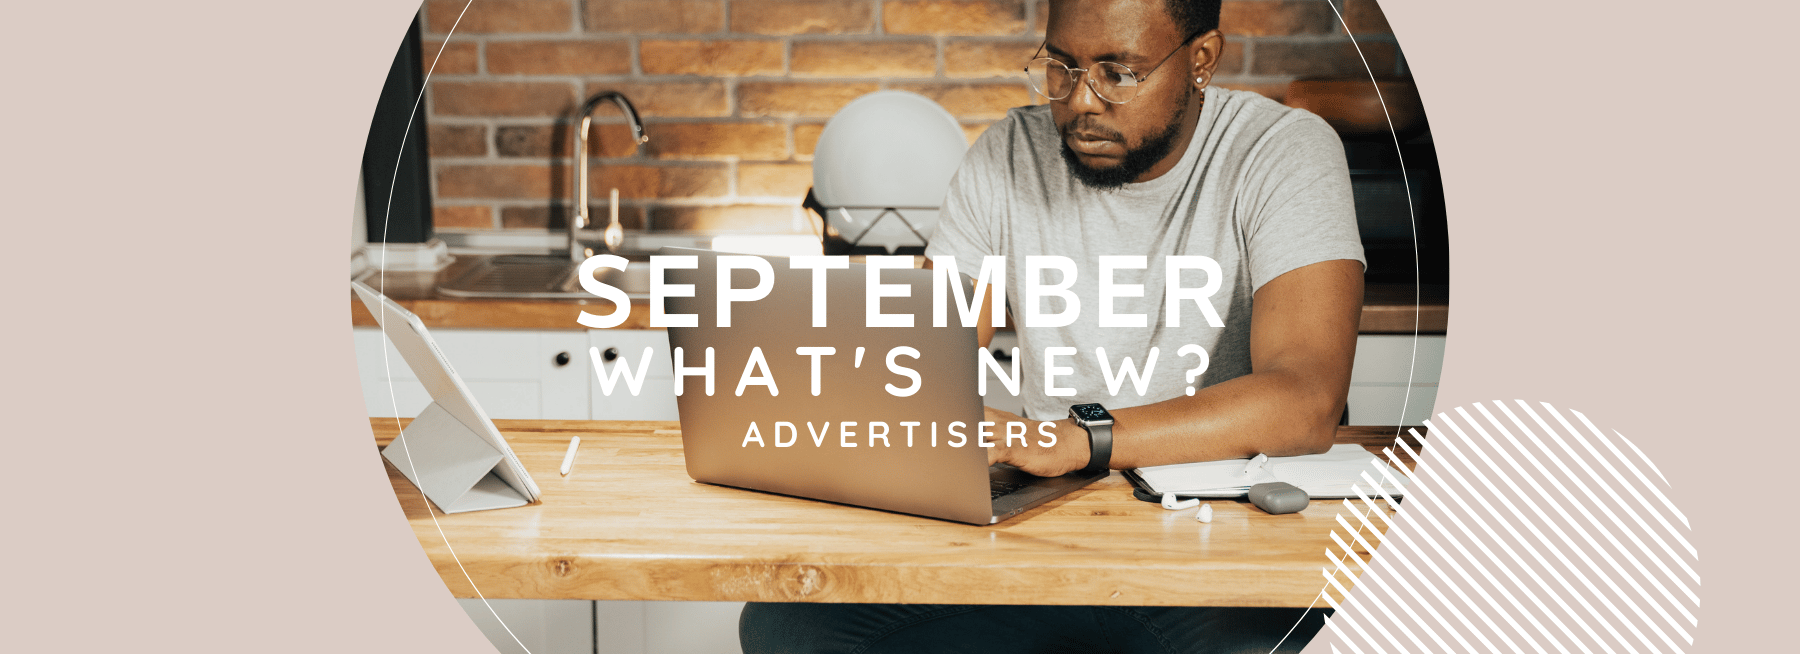 september-features-updates-advertisers